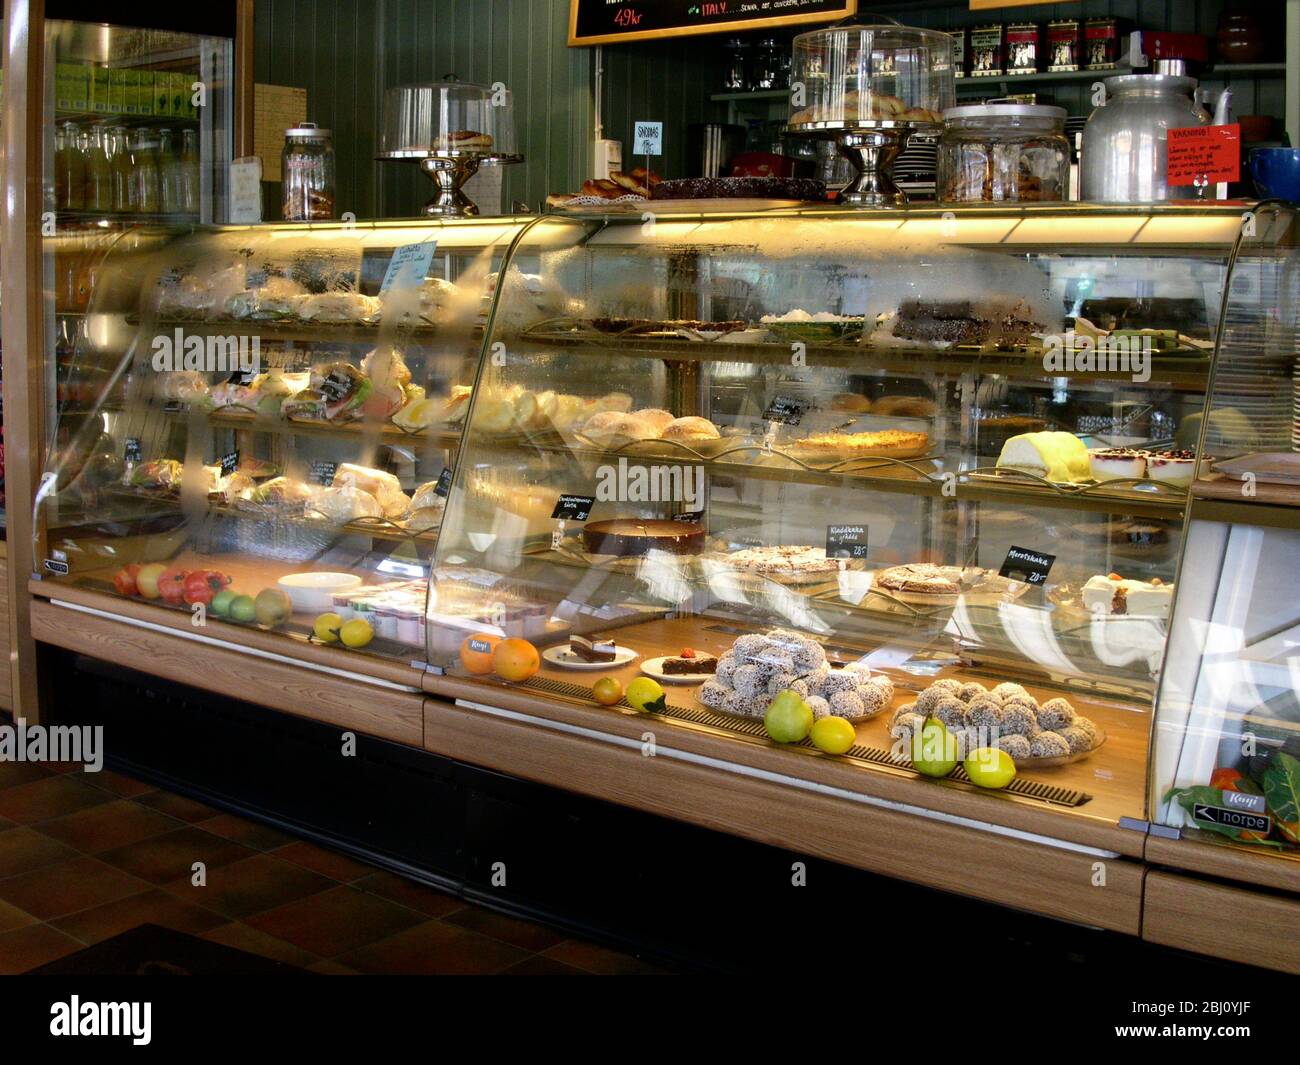 Interior showing pastries fruit and coffee on offer in Cafe Mignon in Varberg, Sweden - Stock Photo